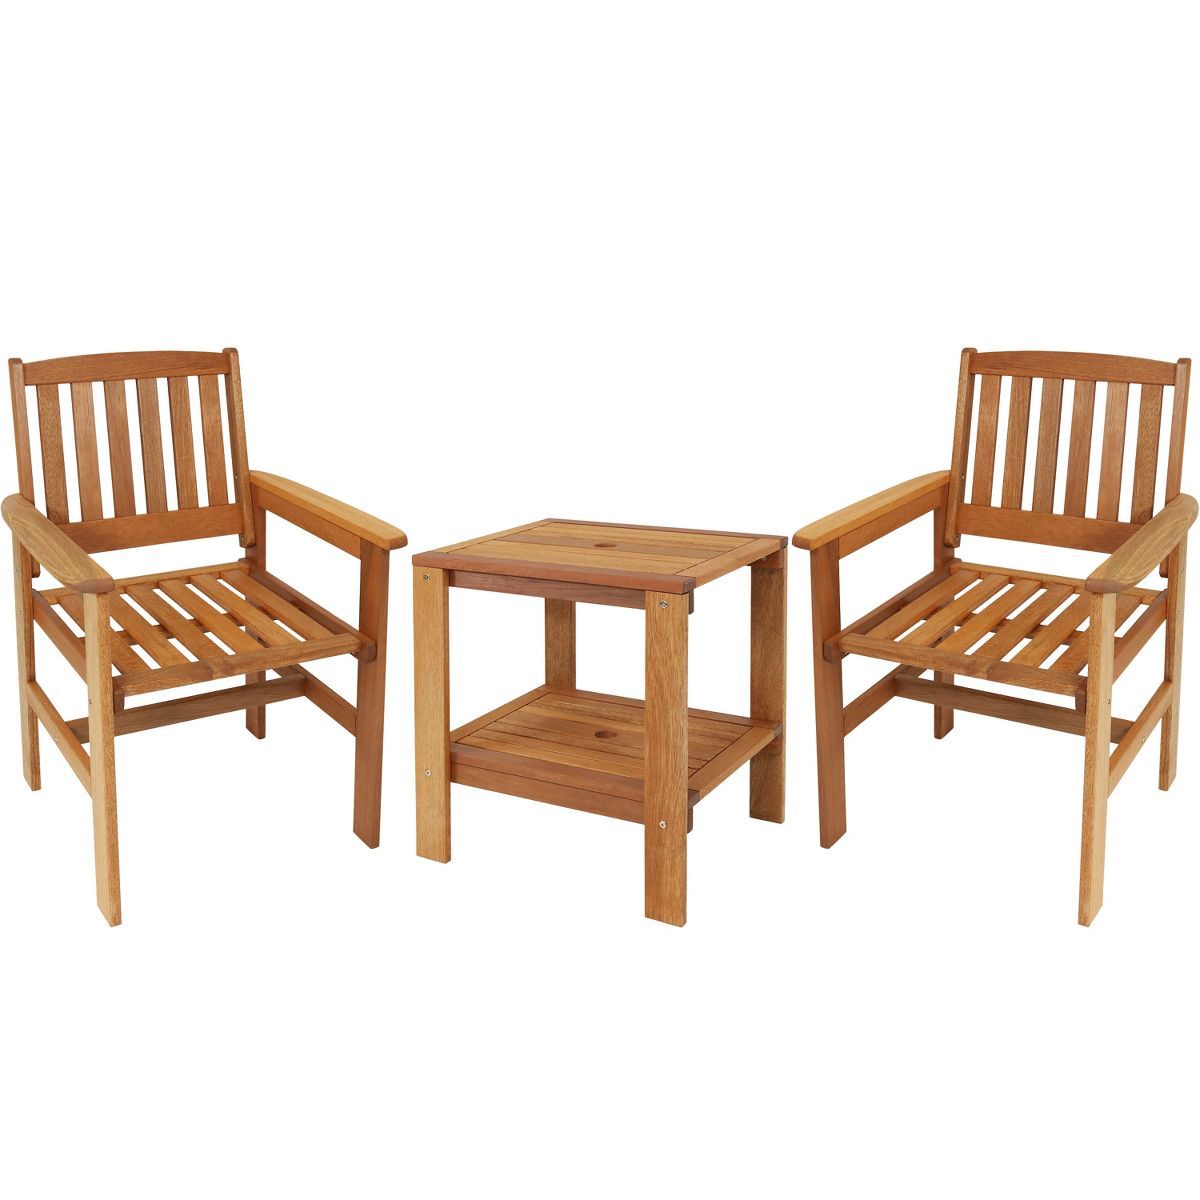 Sunnydaze Outdoor Meranti Wood with Teak Oil Finish Patio Table and Chairs Conversation Set - Bro... | Target